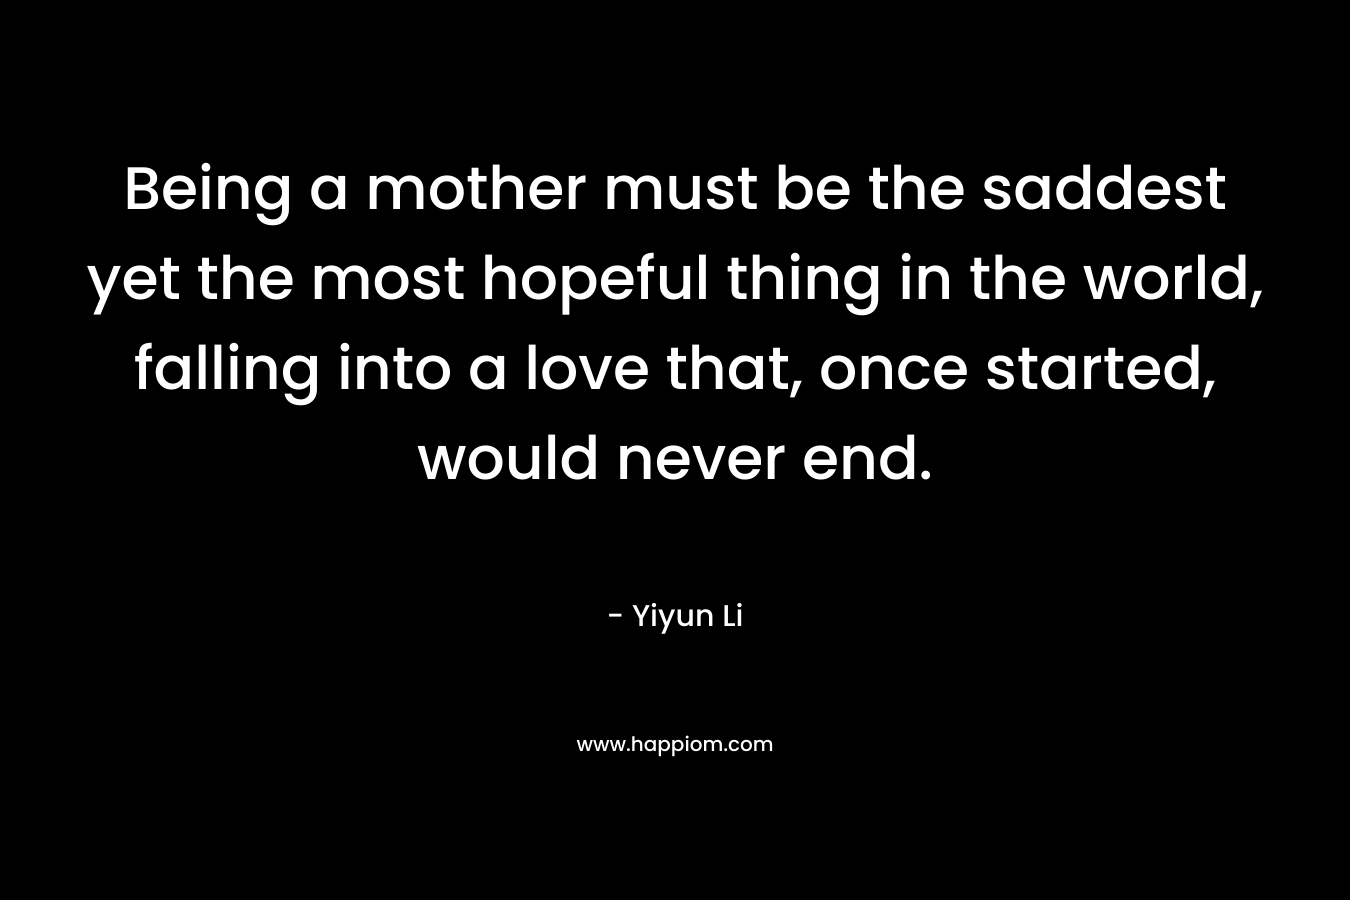 Being a mother must be the saddest yet the most hopeful thing in the world, falling into a love that, once started, would never end.